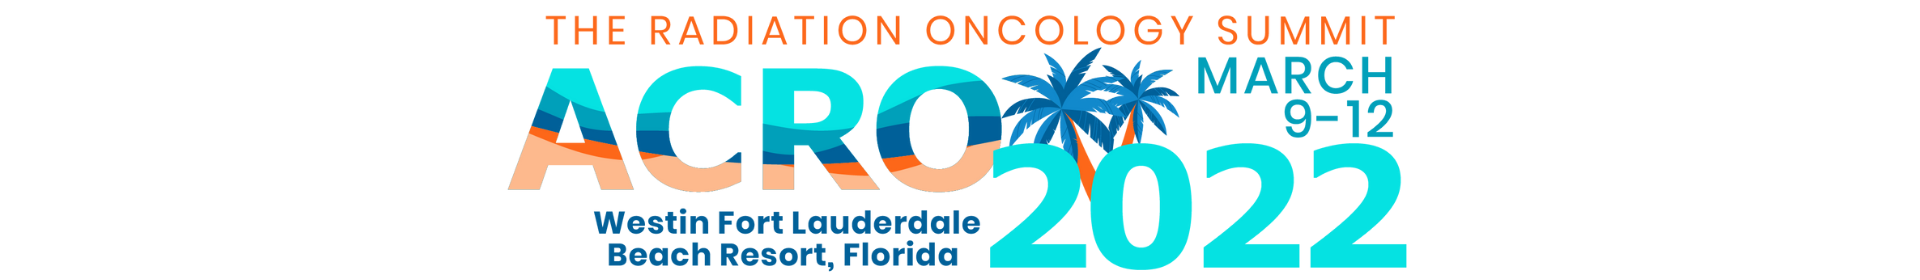 ACRO 2022 The Radiation Oncology Summit Event Banner